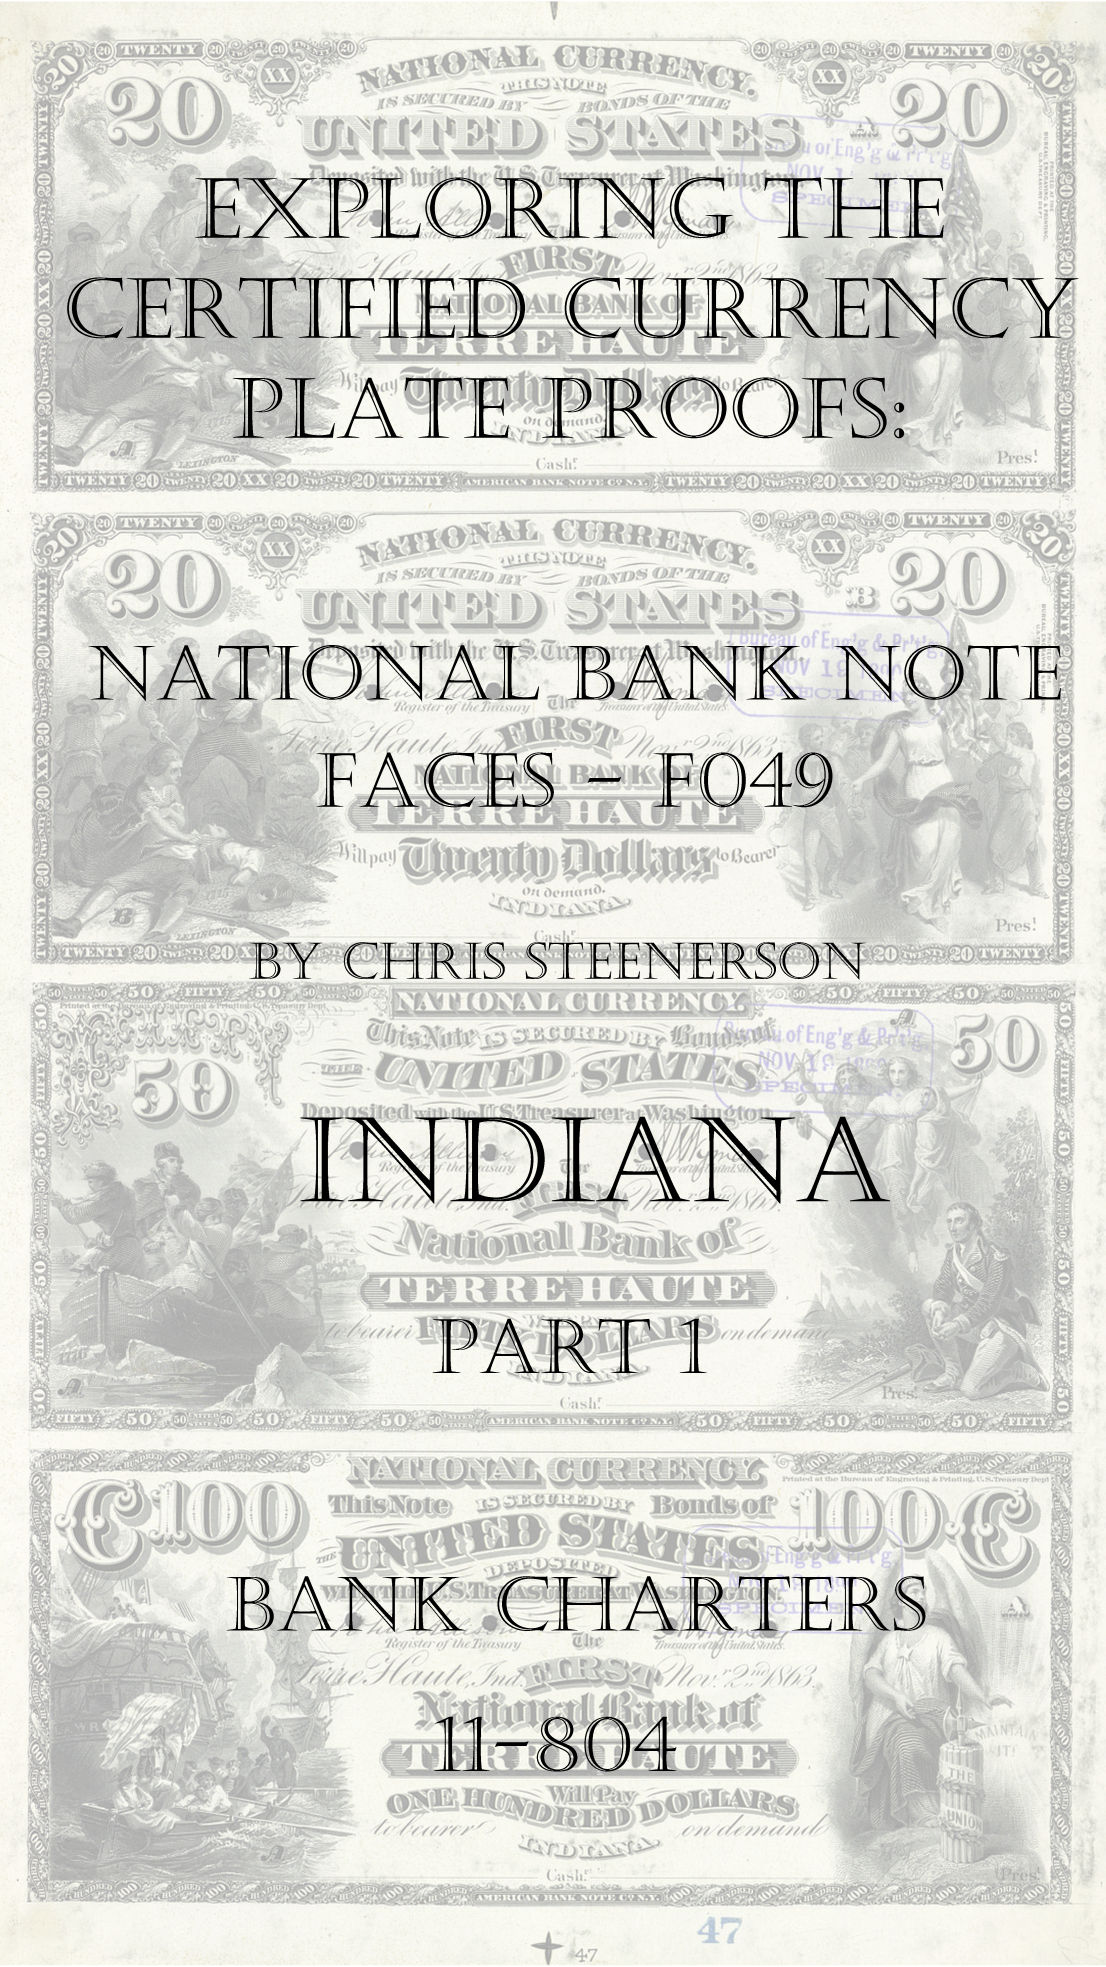 Indiana National Bank Note Currency Proofs